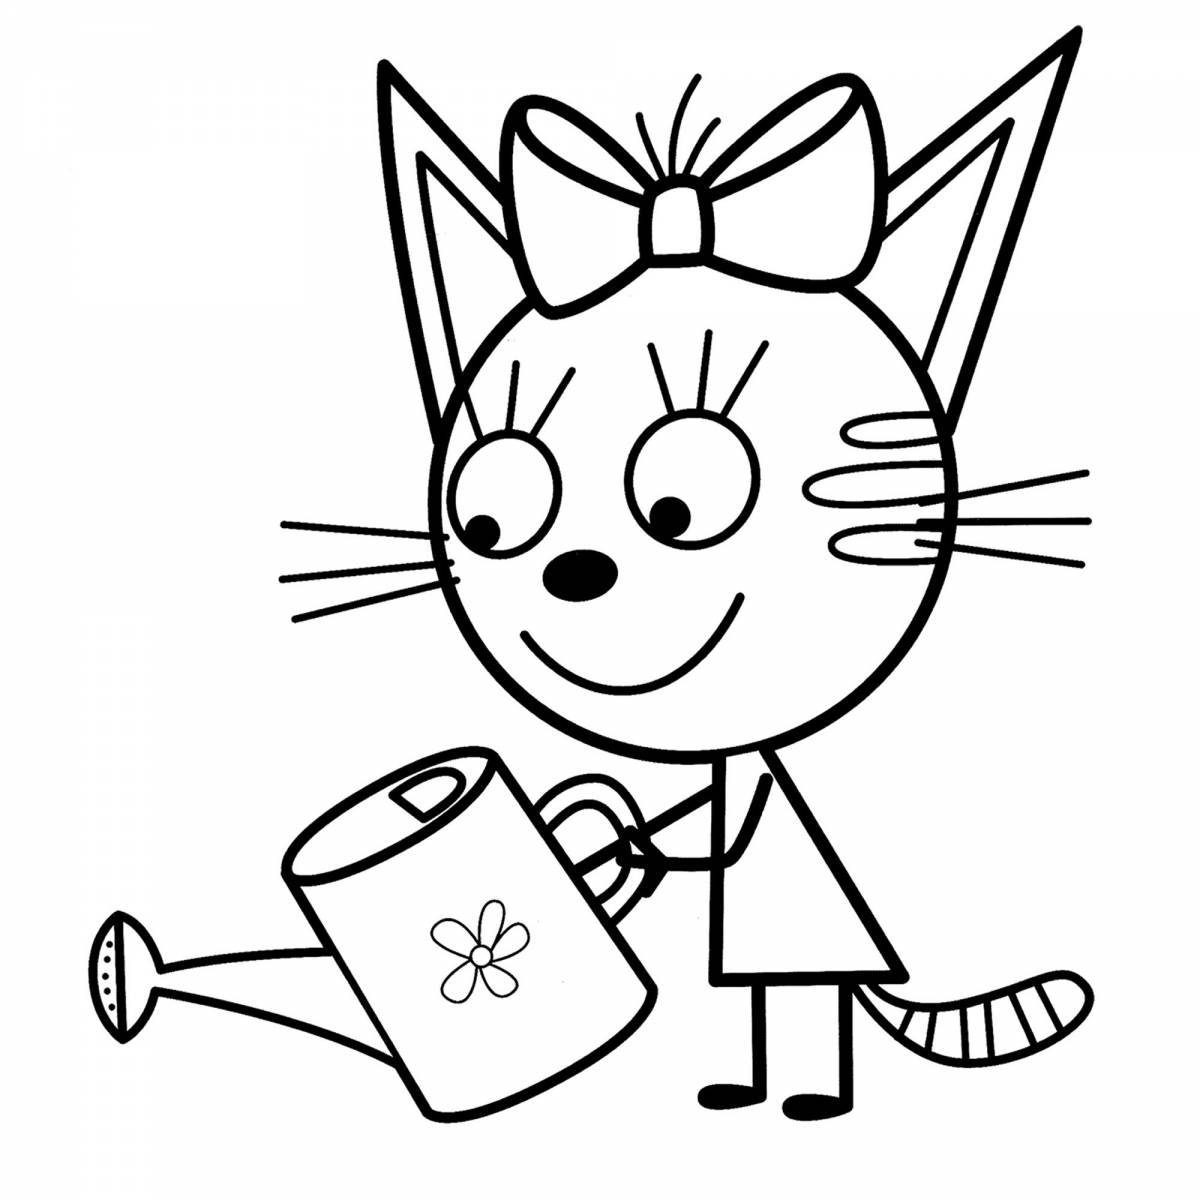 Exciting three cats coloring book for kids